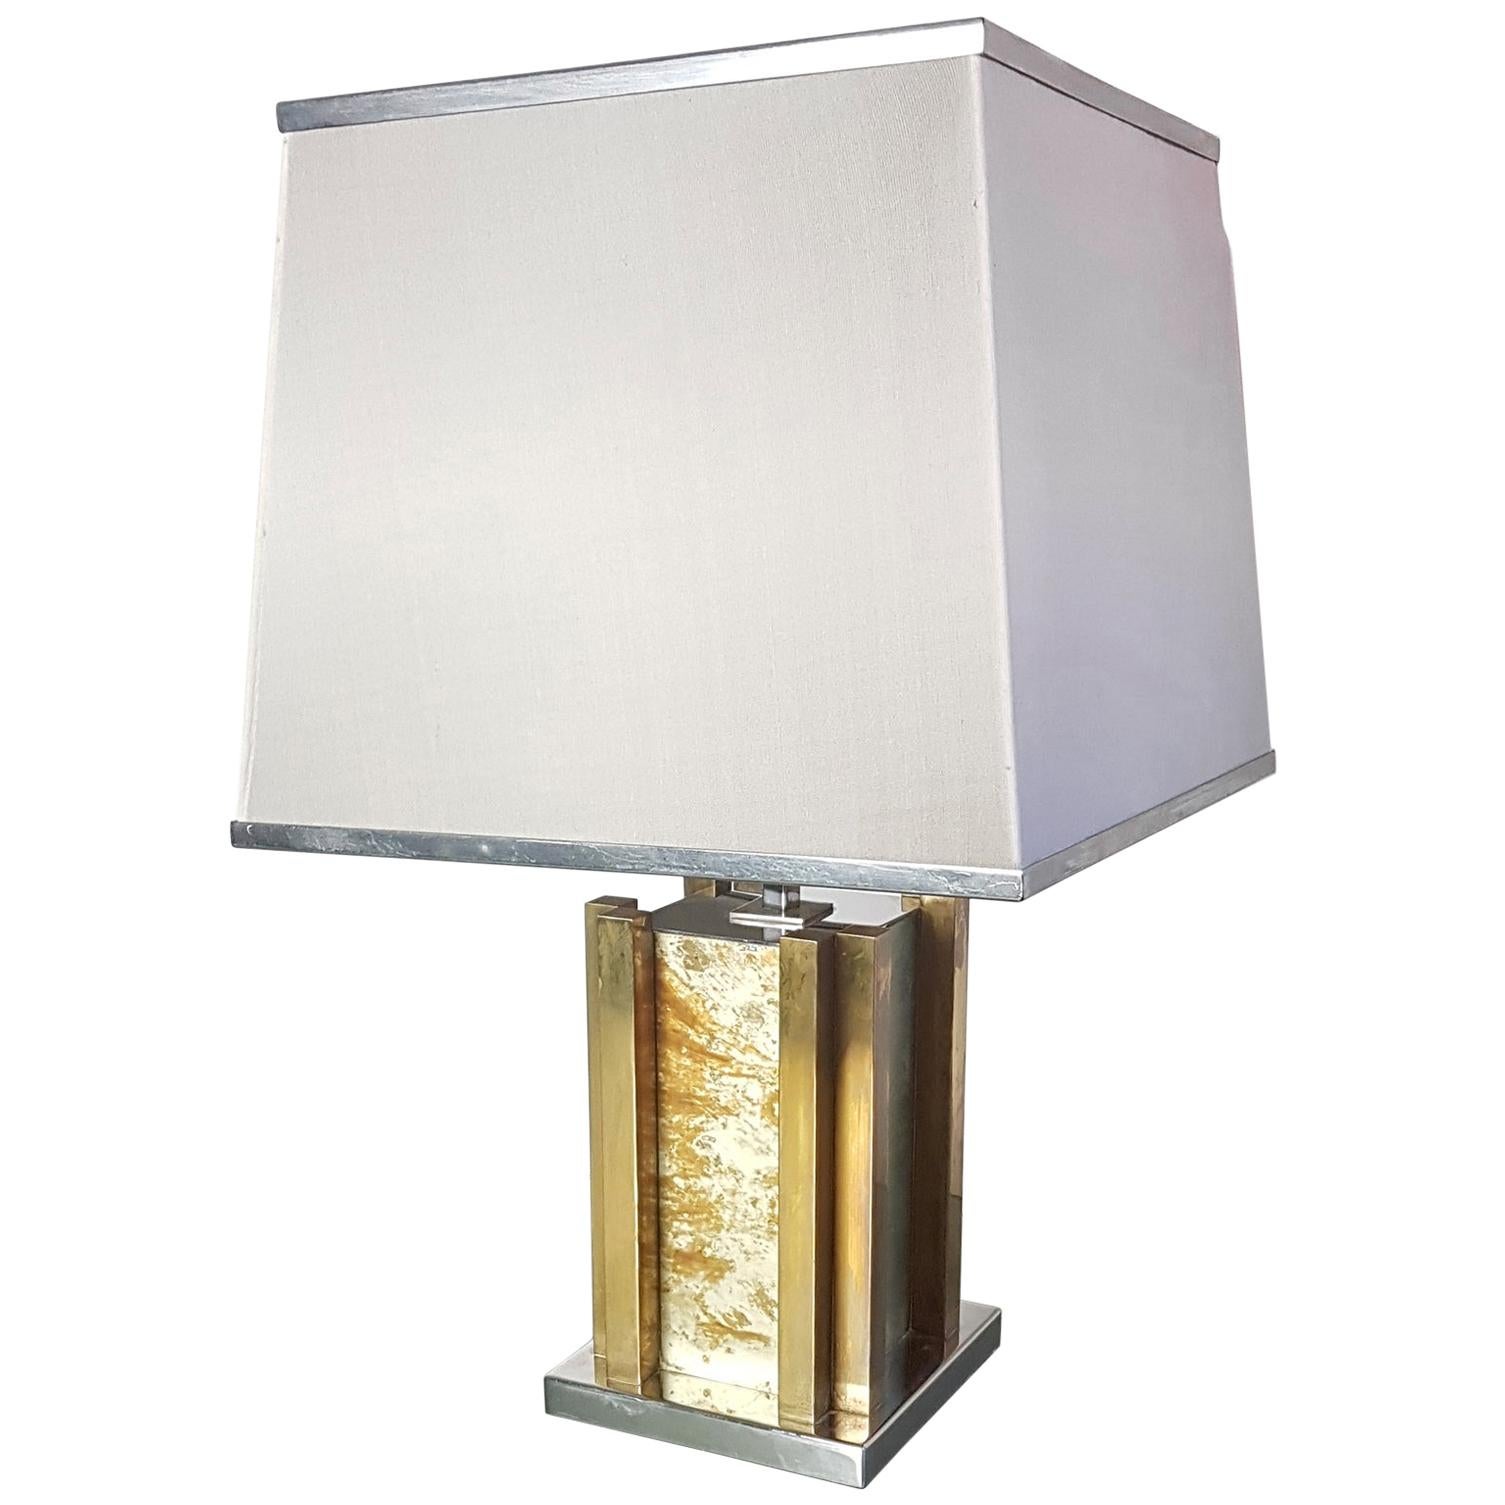 Romeo Rega Table Lamp in Brass and Chrome made in Italy